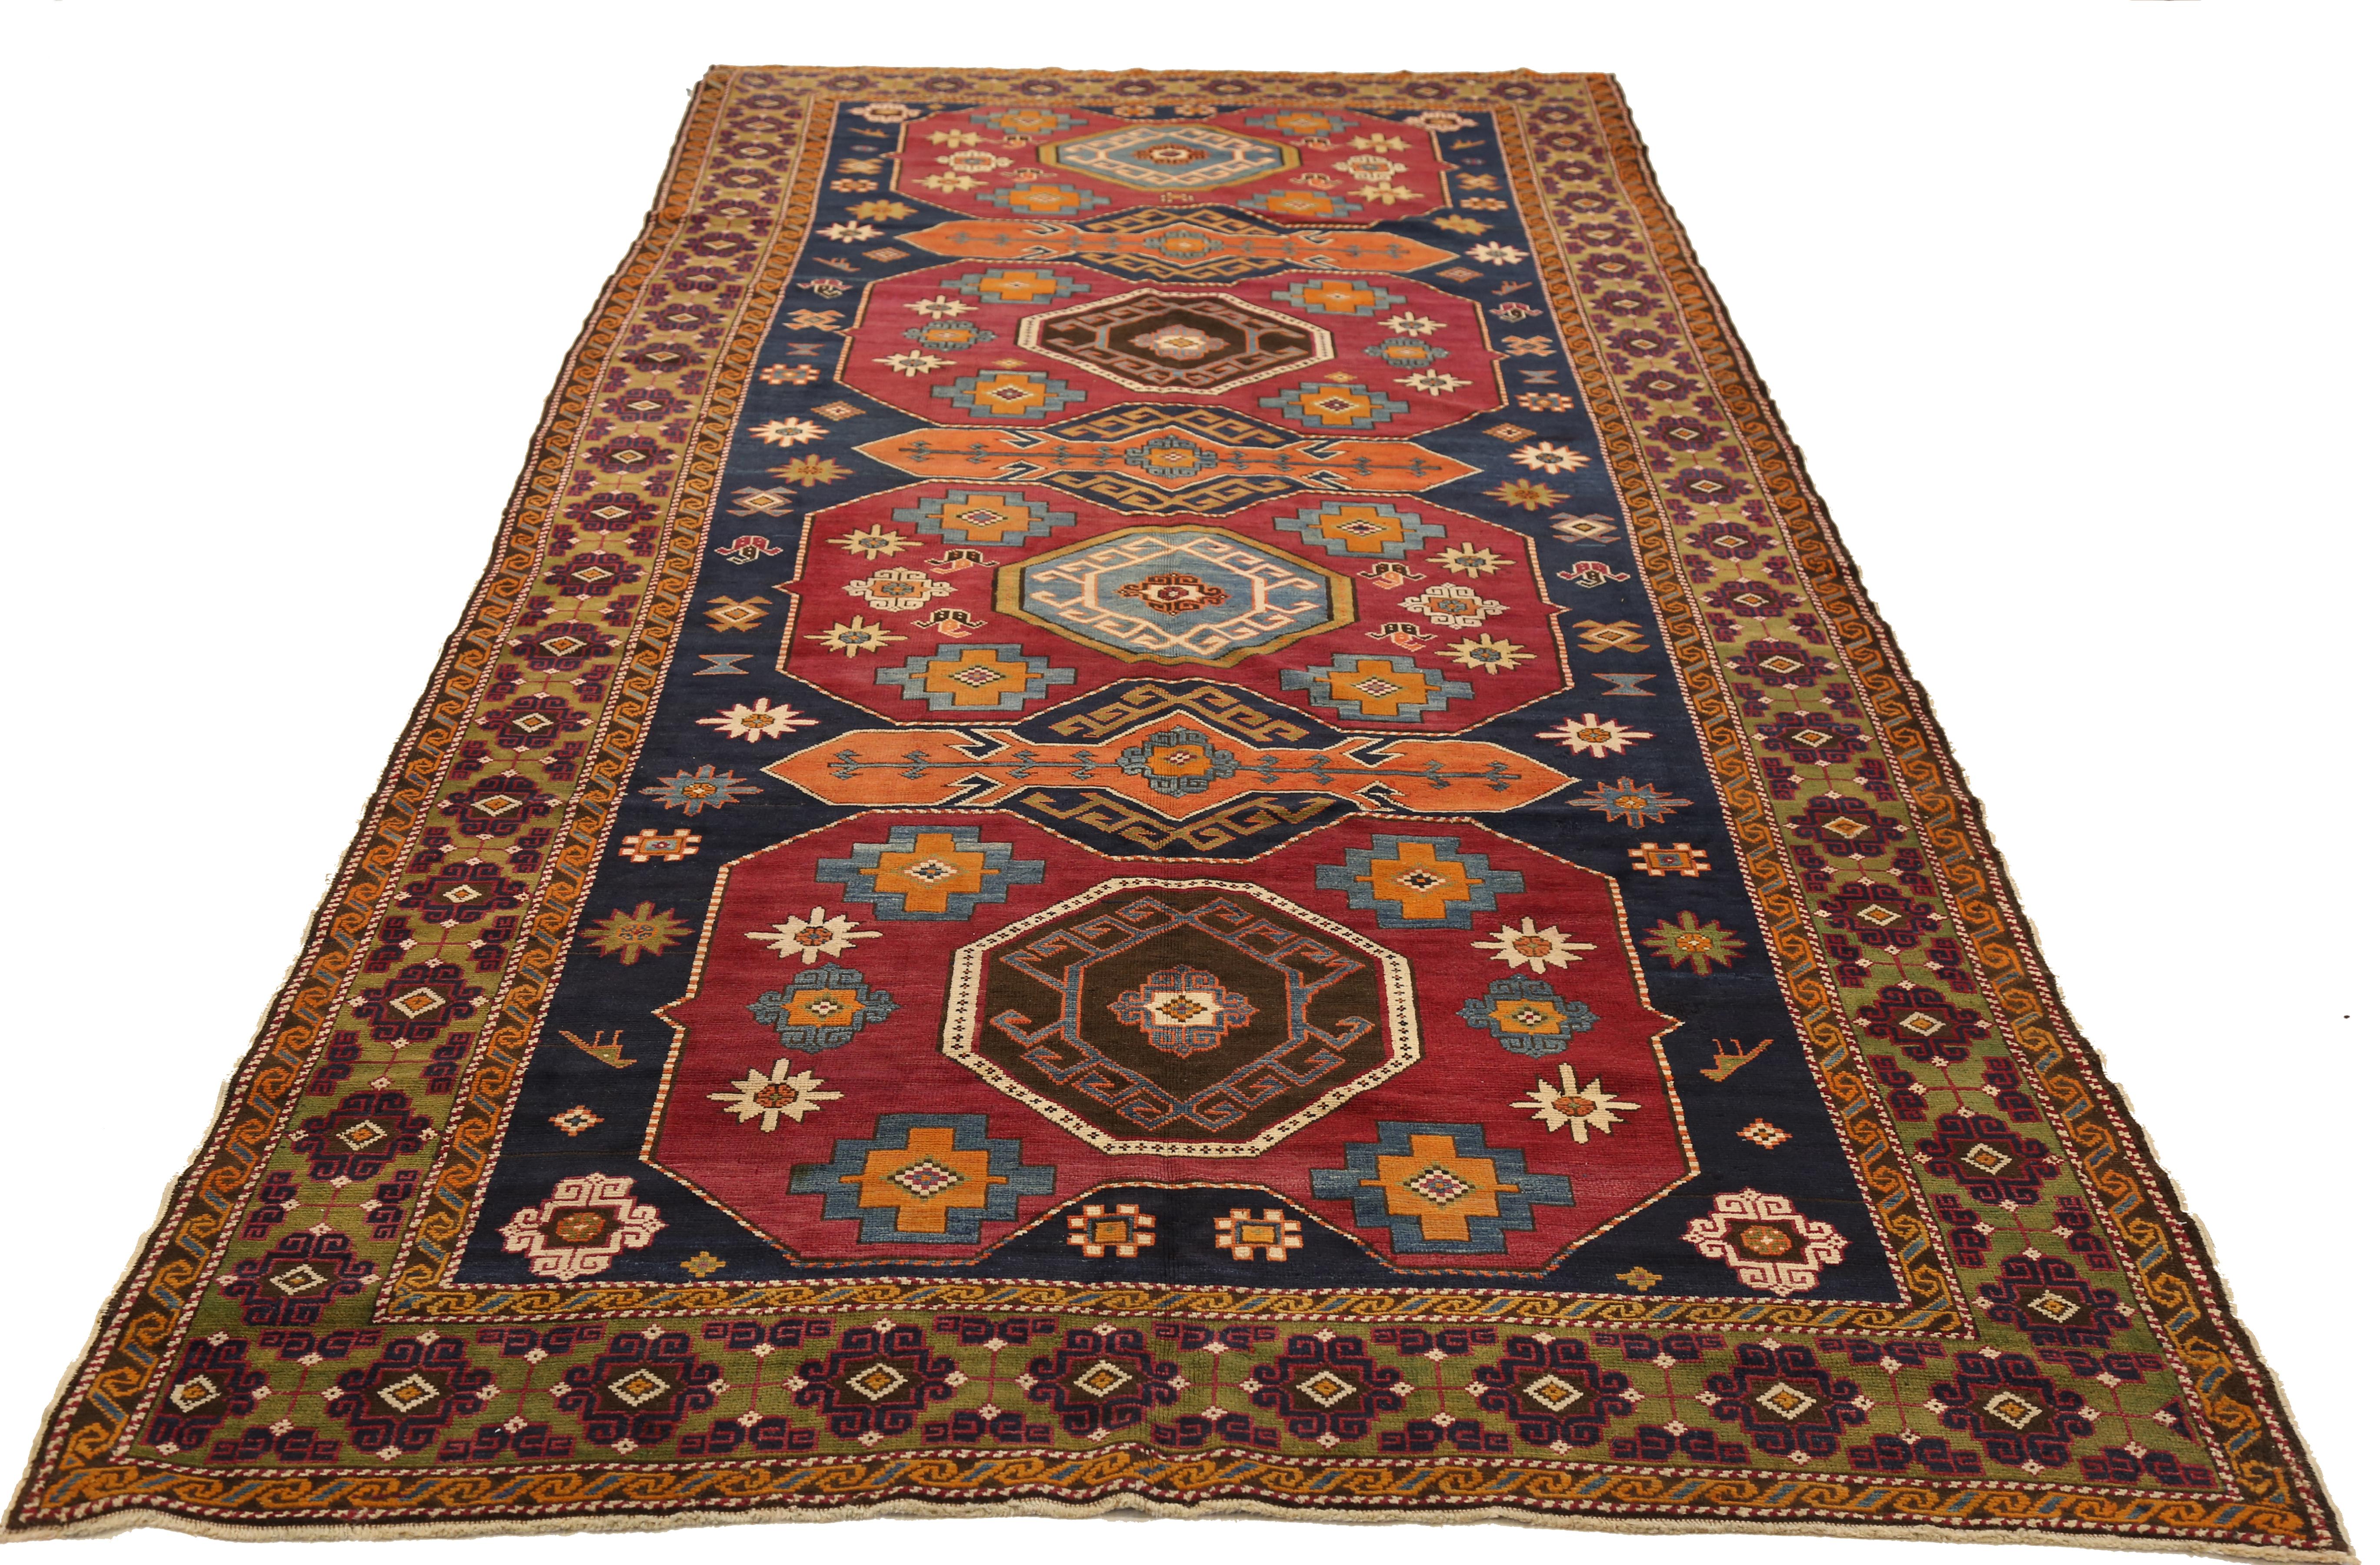 Vintage tribal Russian rug handwoven from fine wool and all-natural vegetable dyes that are safe for people and pets. It features a unique mix of geometric and botanical patterns that distinguish Caucasian rugs from other carpets. The dark